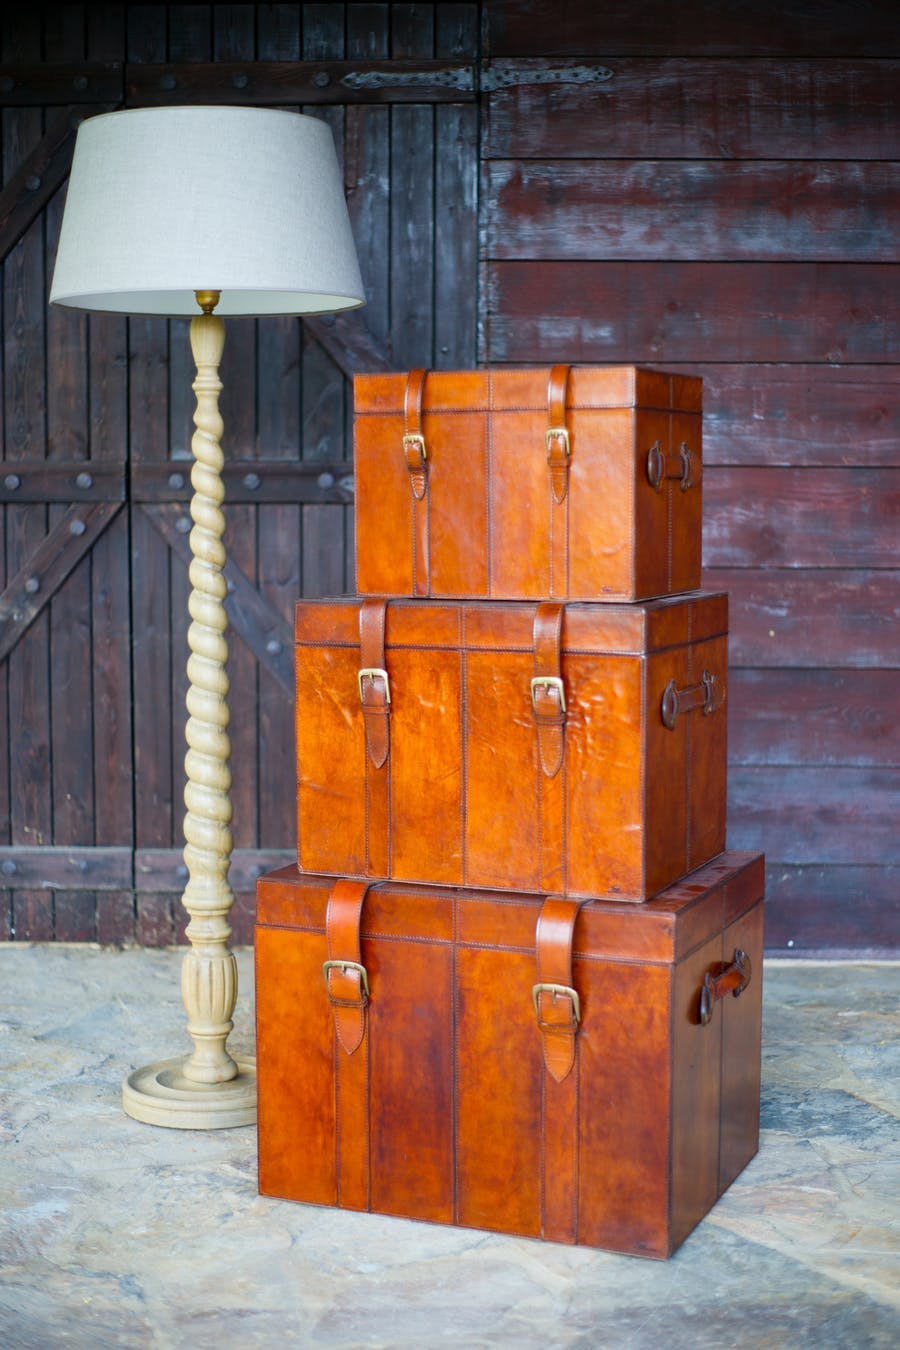 The Story of the Trunk: From a Suitcase to a Treasure Chest of